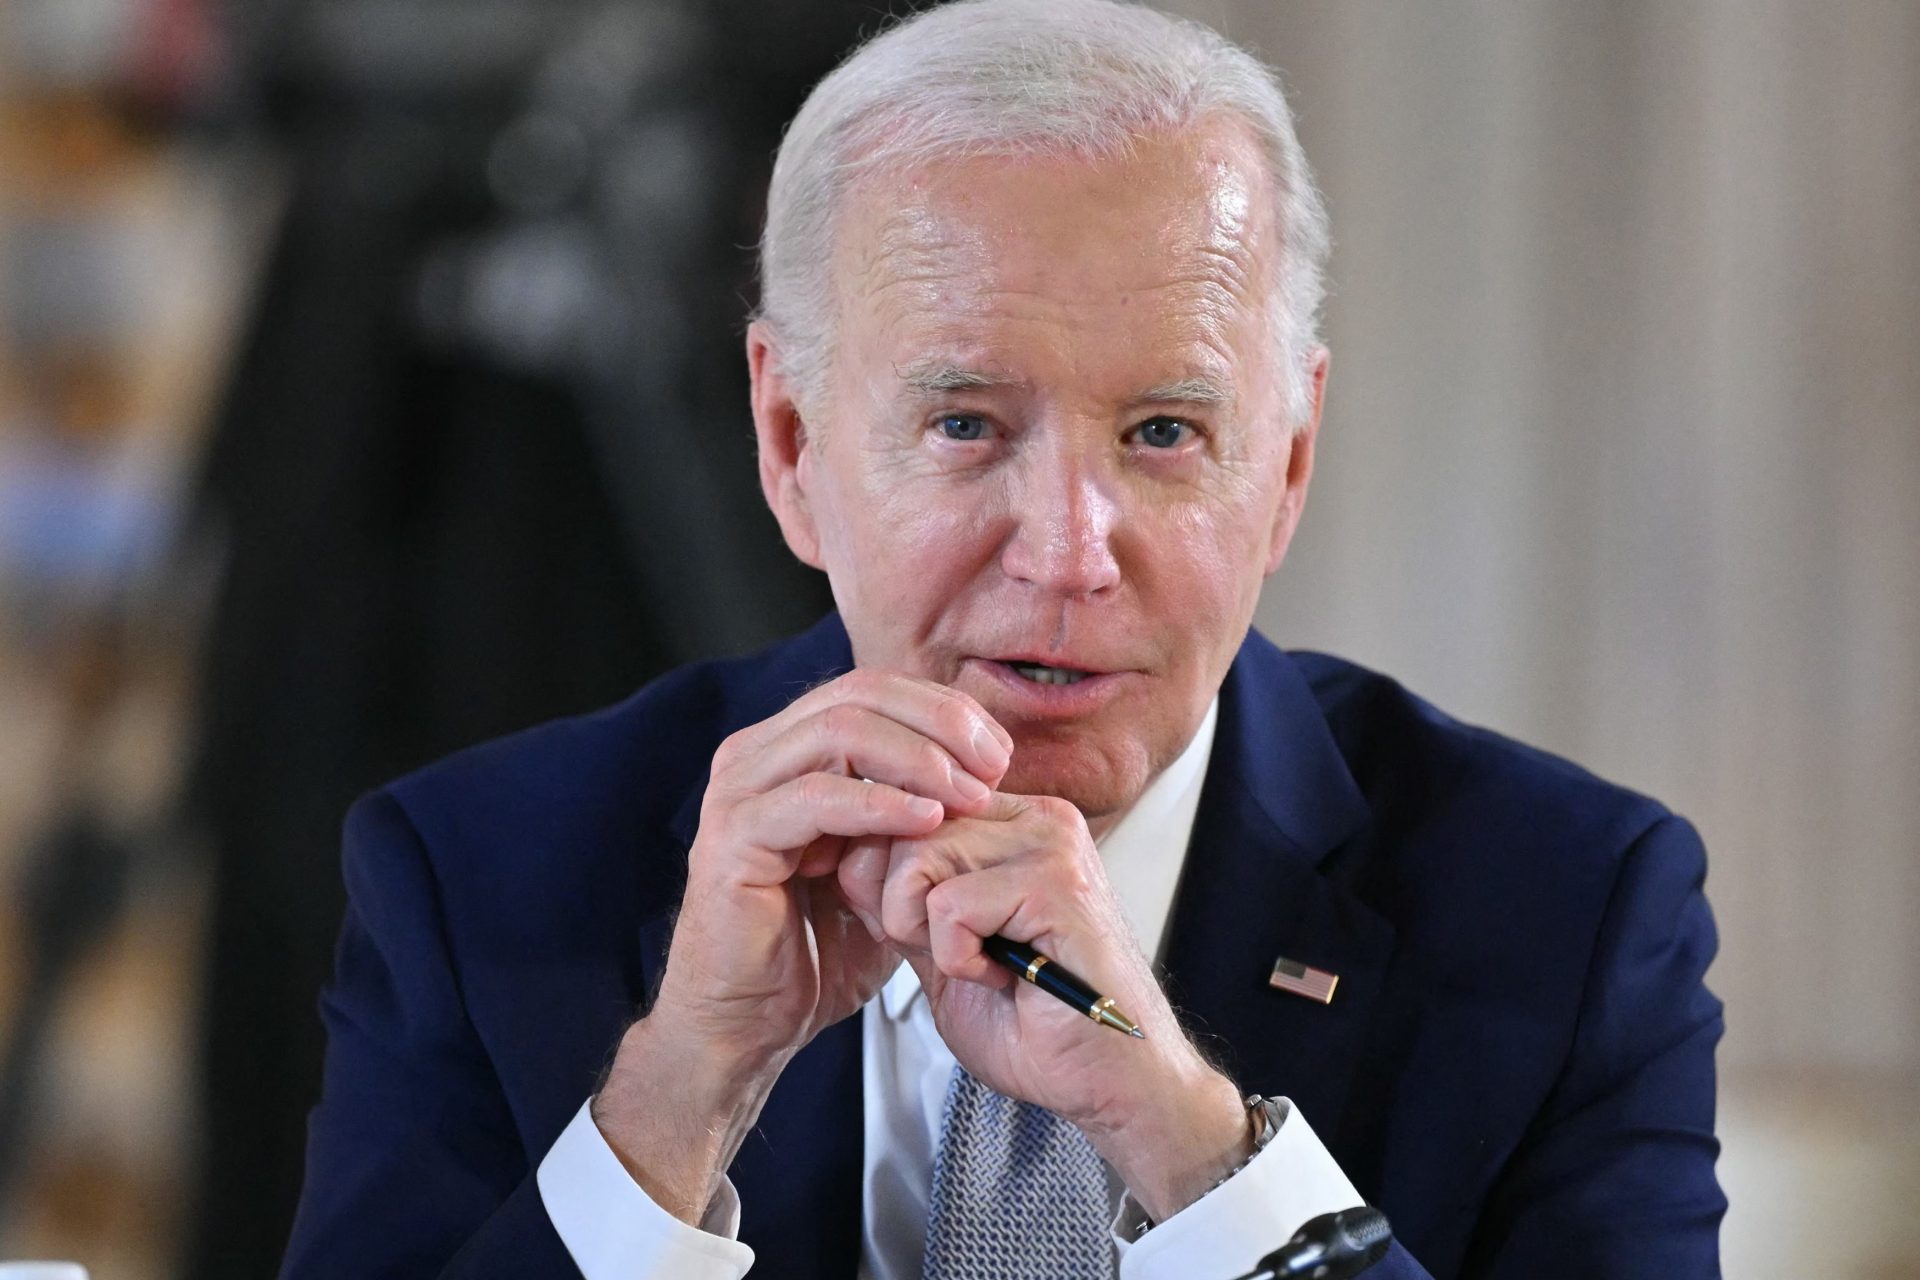 Can Biden survive another four years?